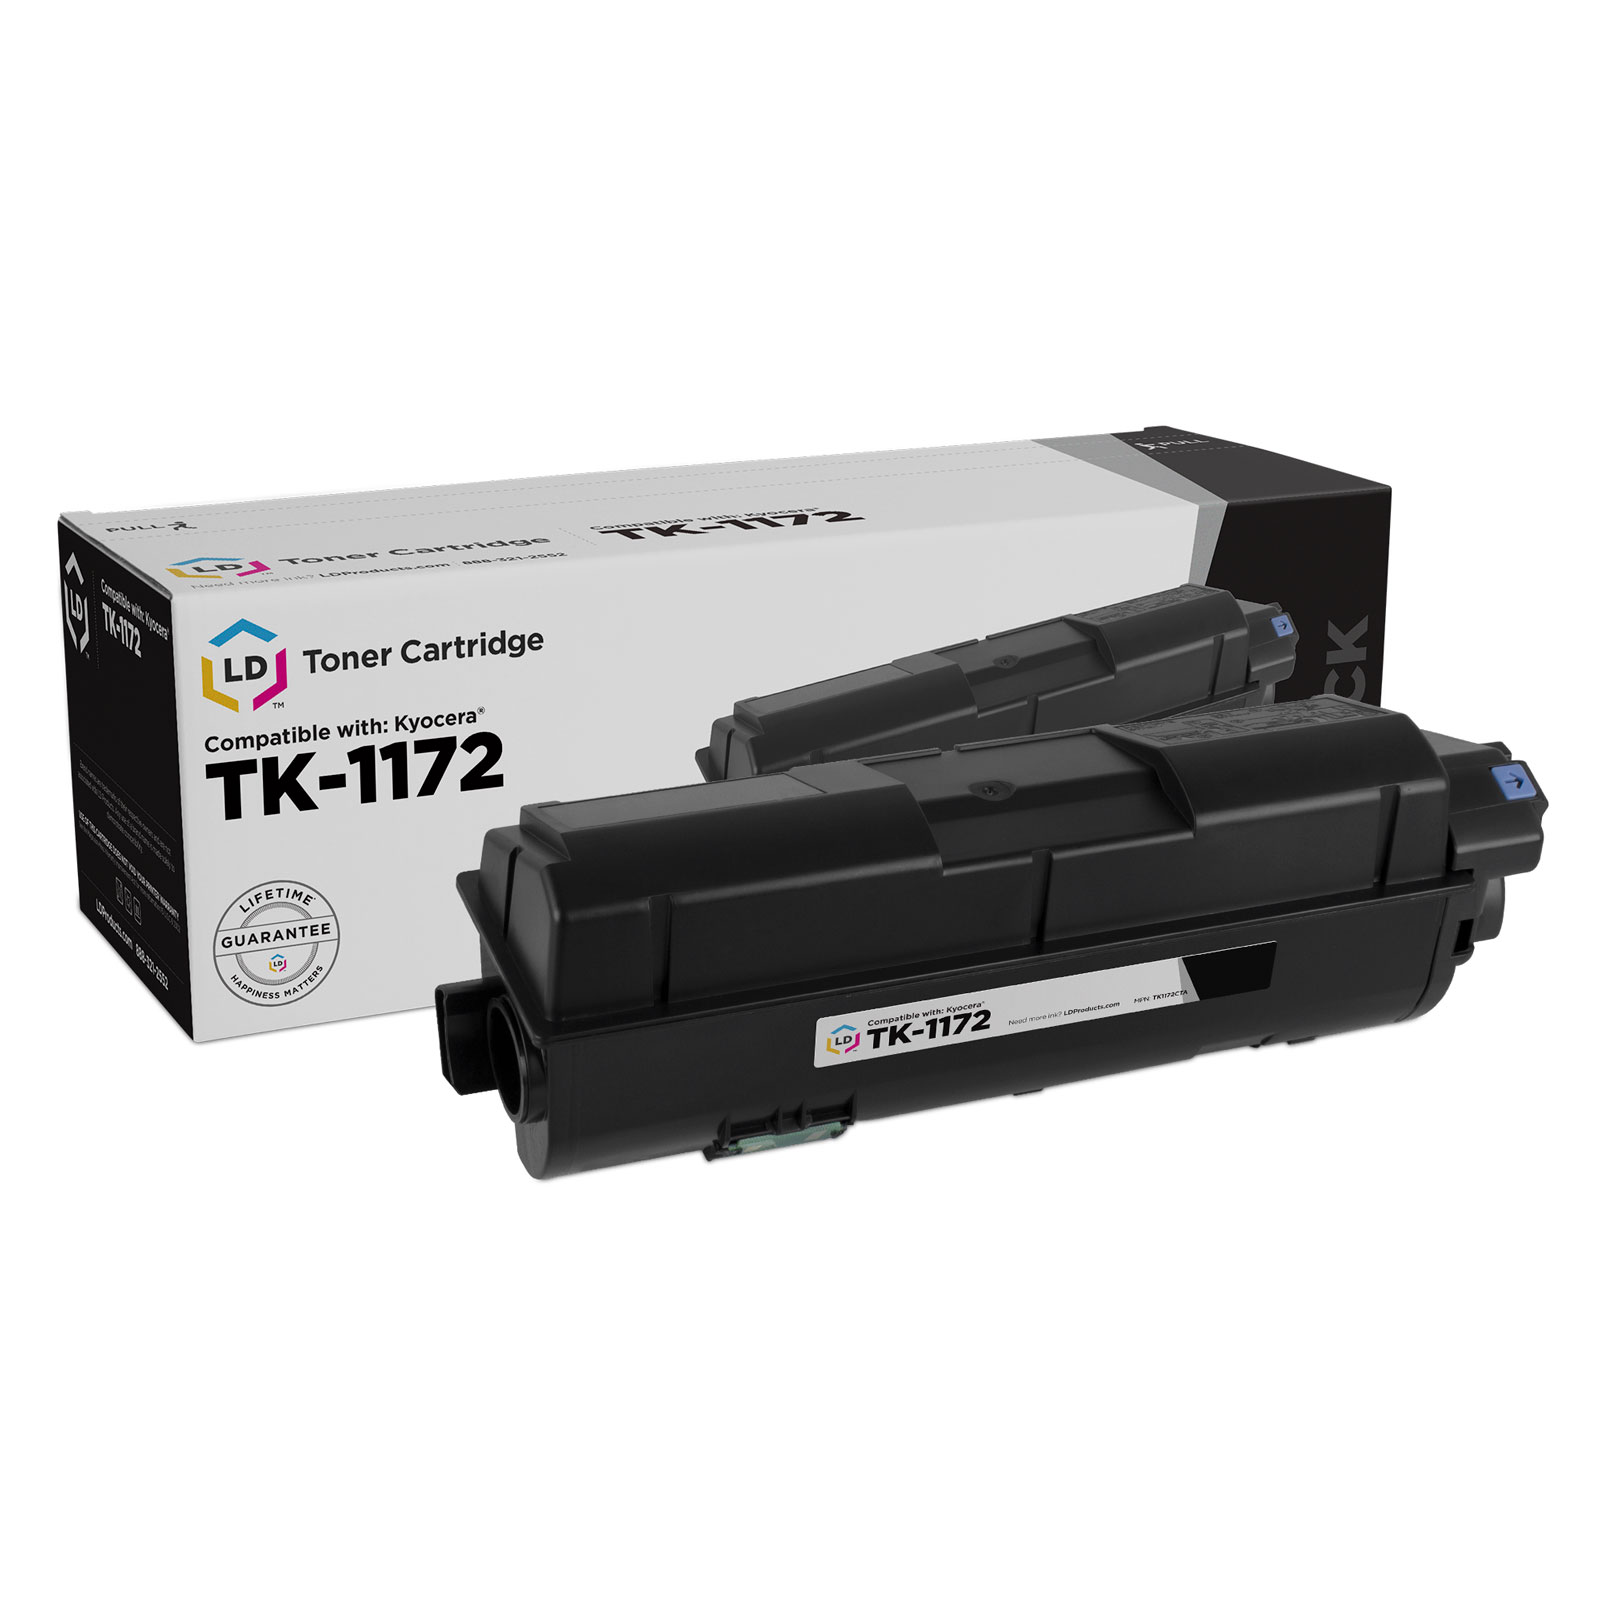 LD Compatible Replacement for Kyocera TK-1172 (1T02S50US0) Black Laser Toner Cartridge for use in M2040dn, M2540d, M2540dw & M2640idw - image 1 of 2